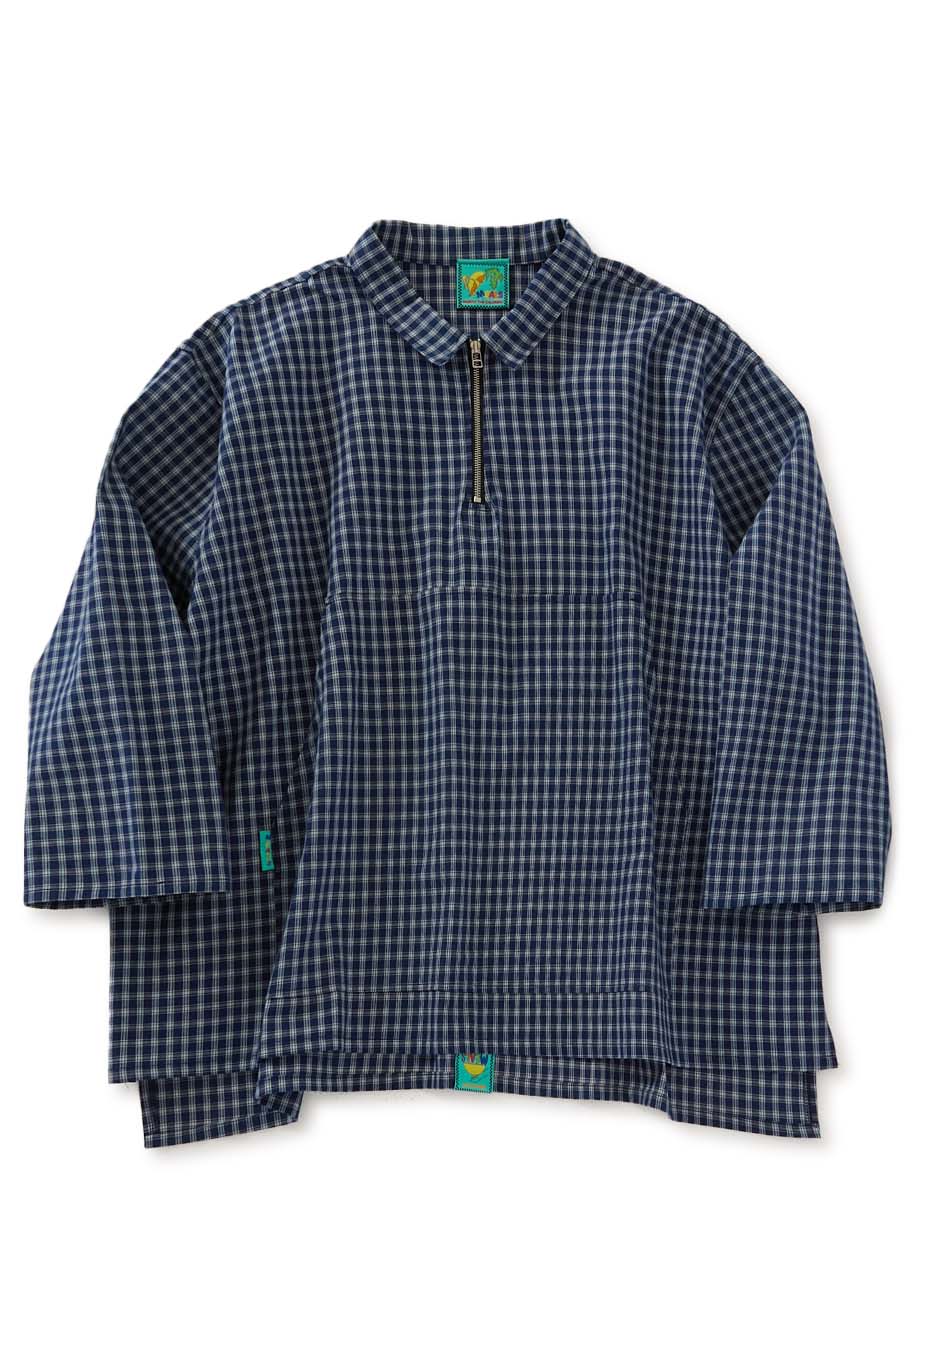 MEALS CLOTHING ZIP PULLOVER PICNIC PLAD